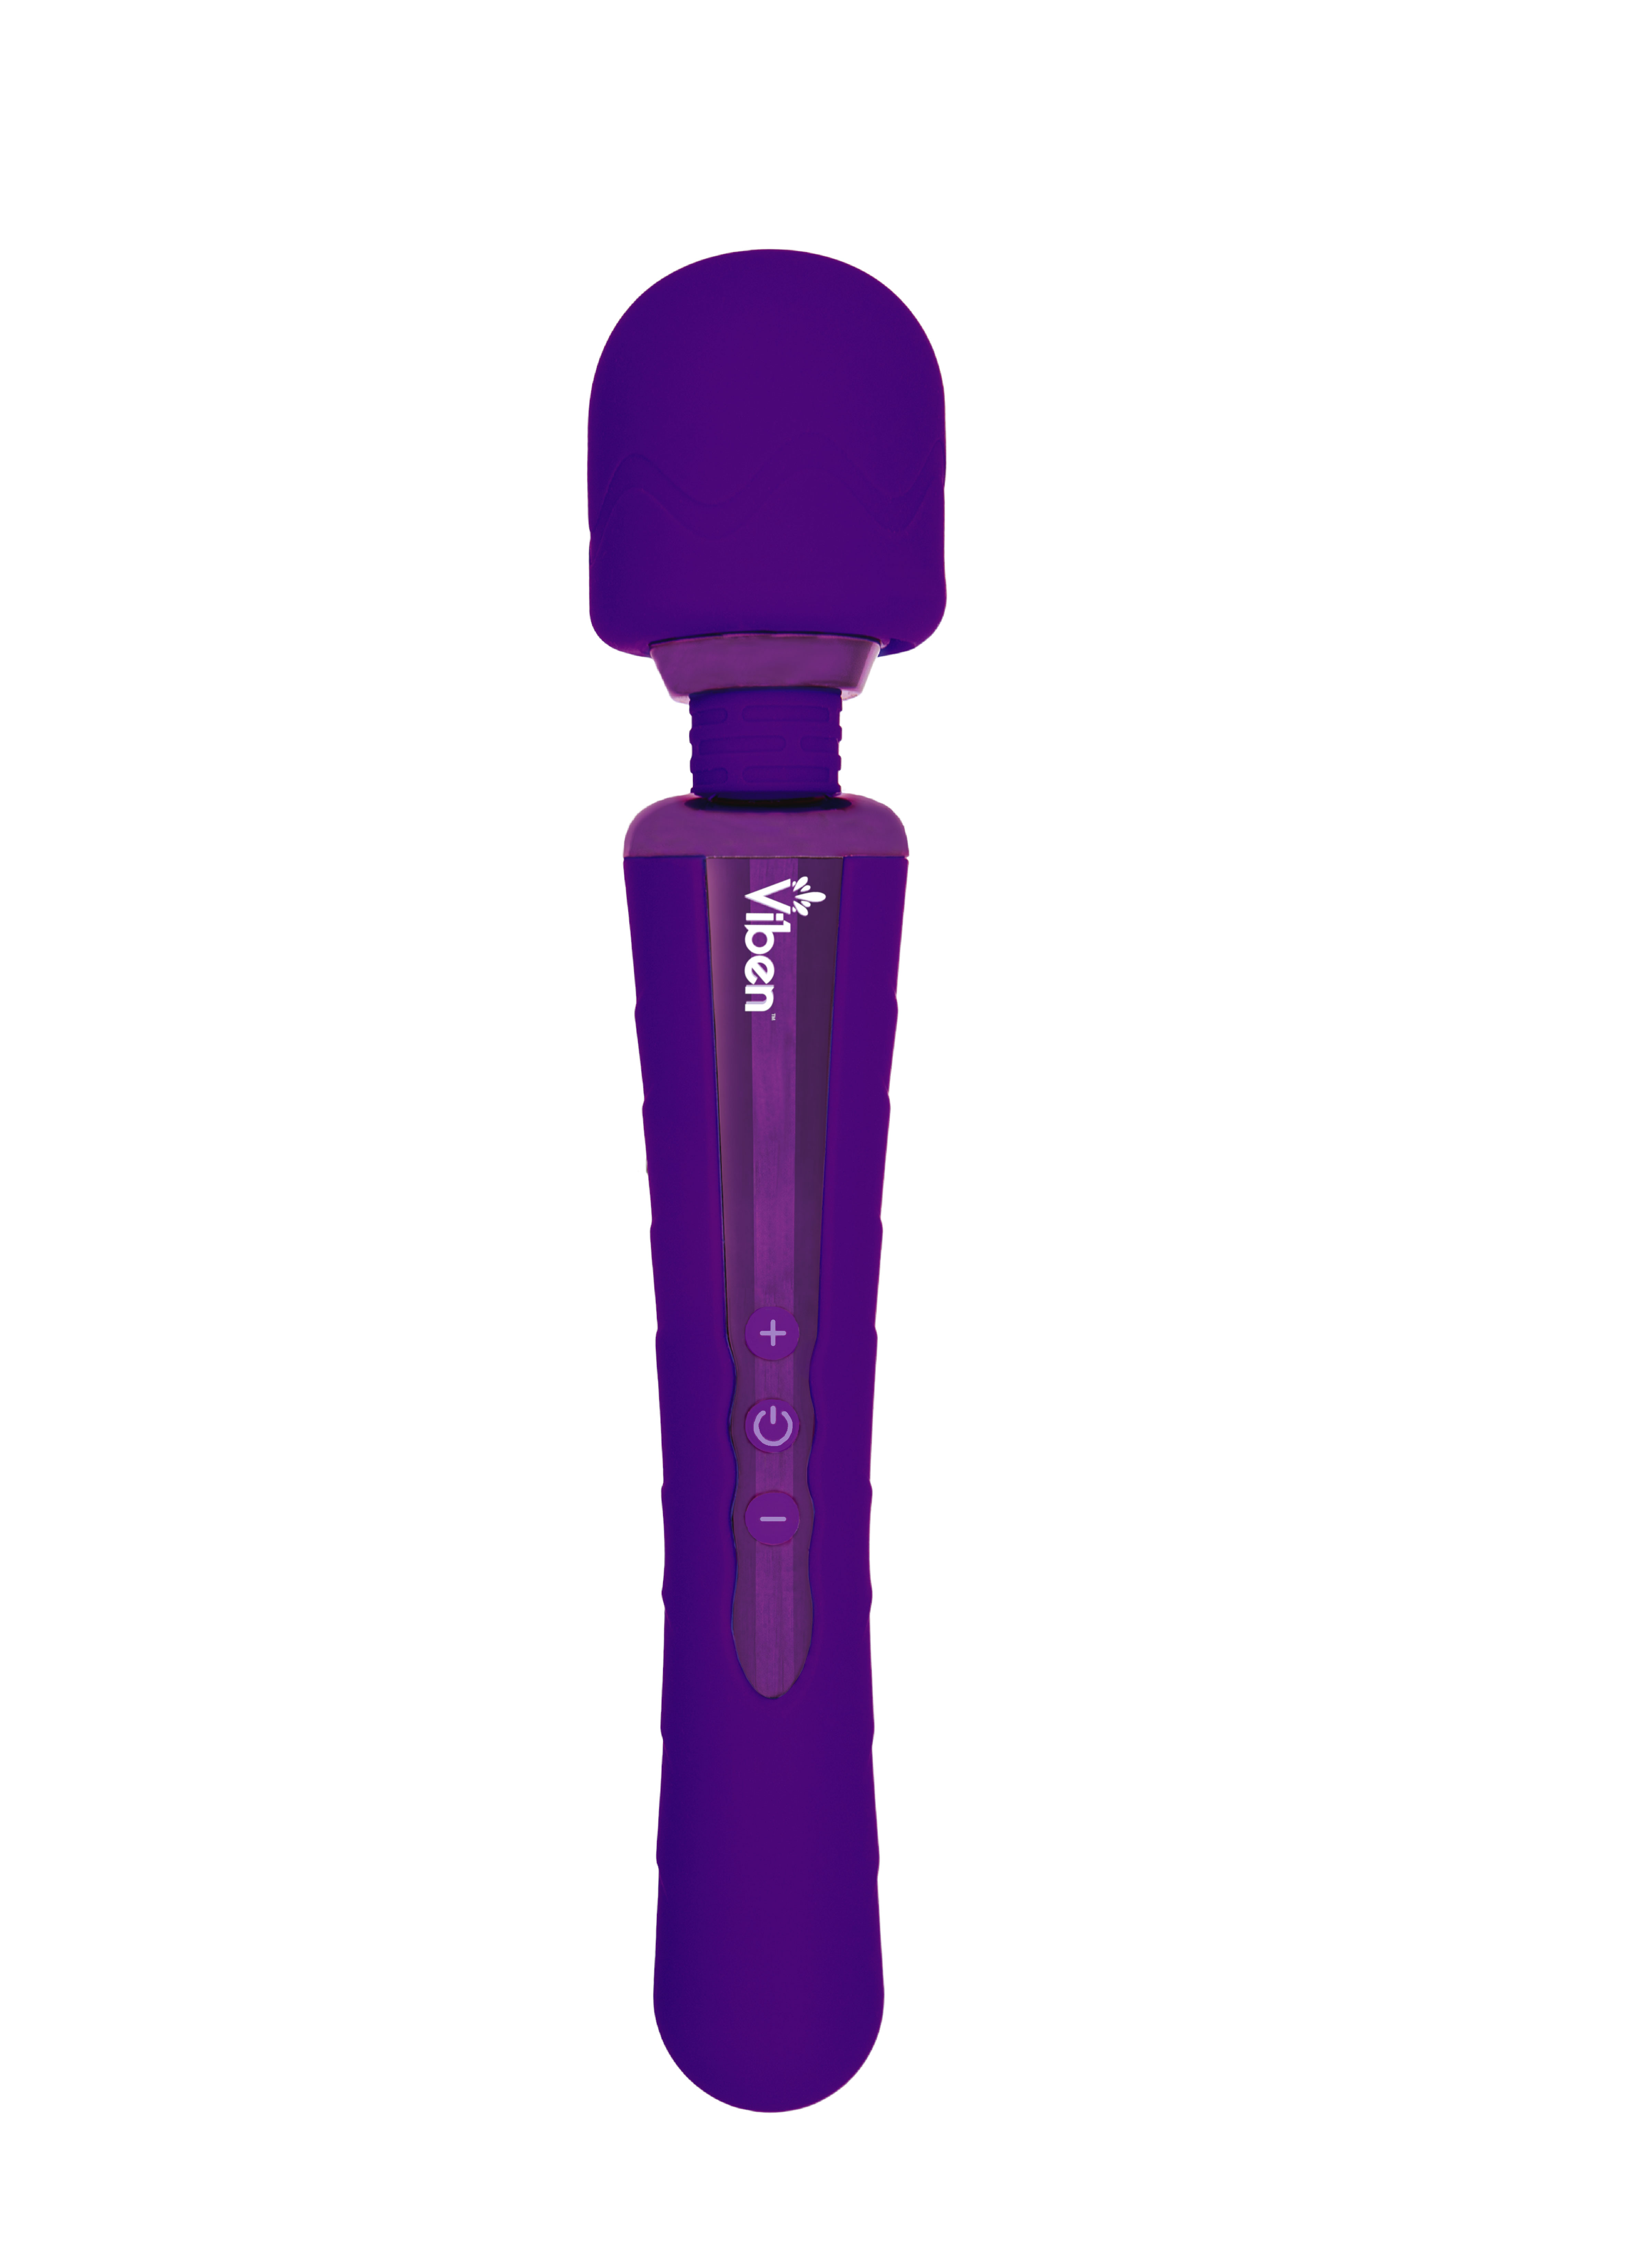 obsession intense wand massager violet 